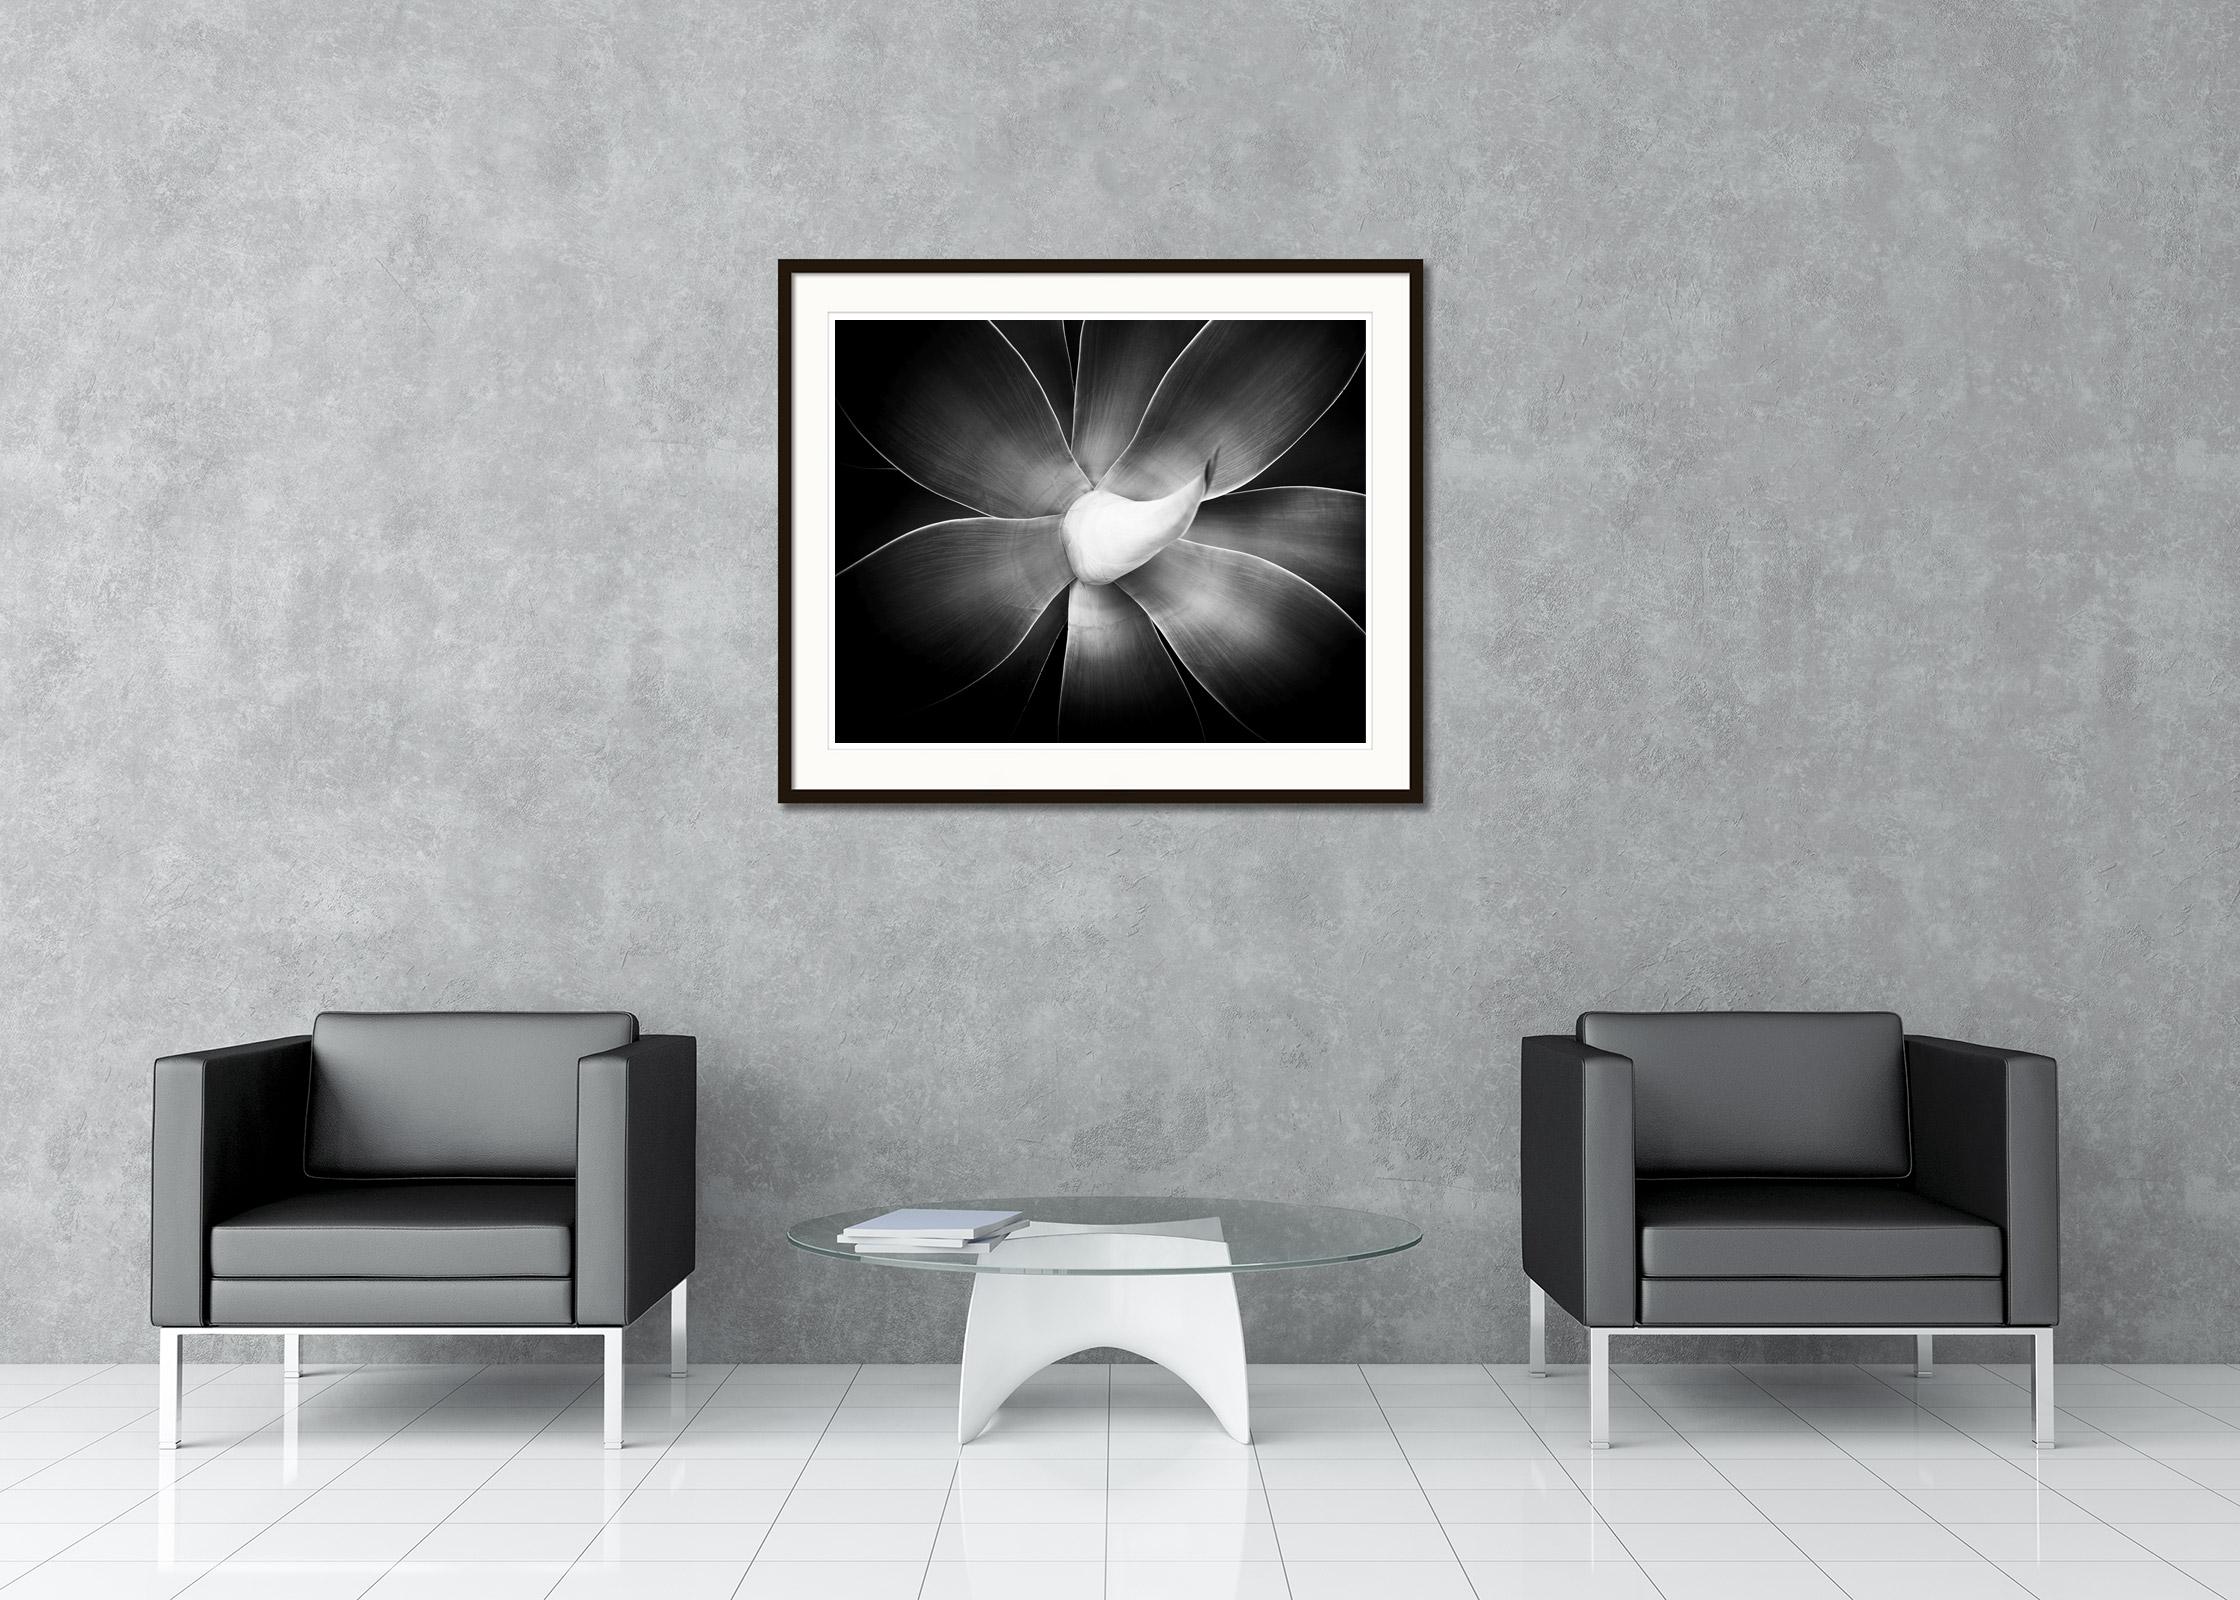 Black and White Fine Art Photography. Archival pigment ink print, edition of 8. Signed, titled, dated and numbered by artist. Certificate of authenticity included. Printed with 4cm white border.
International award winner photographer Gerald